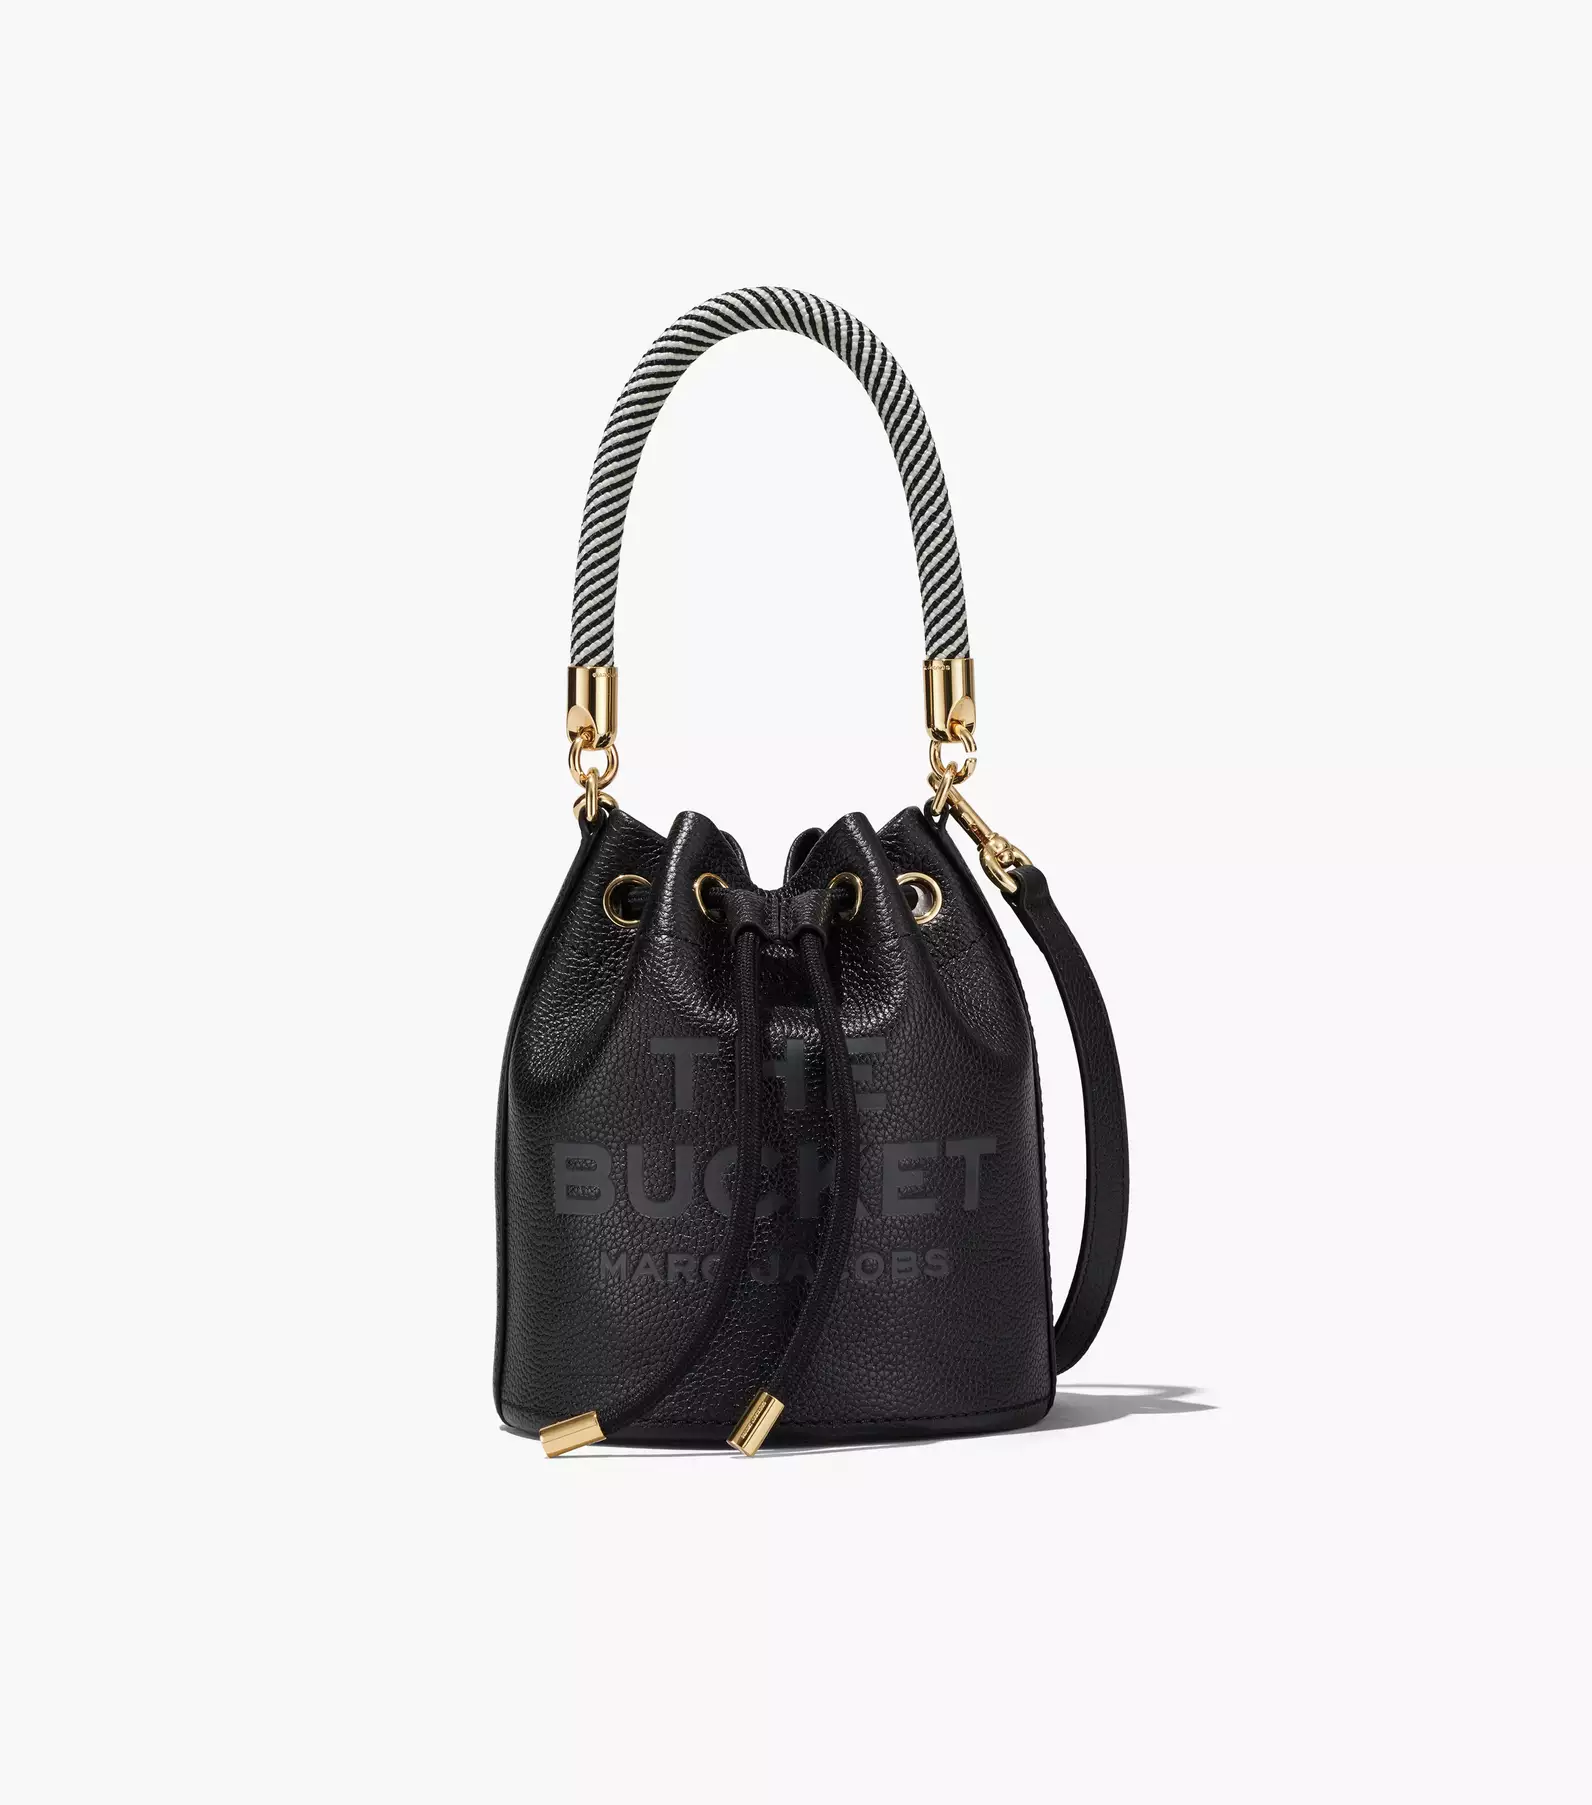 Women's 'the Leather Bucket Bag' by Marc Jacobs